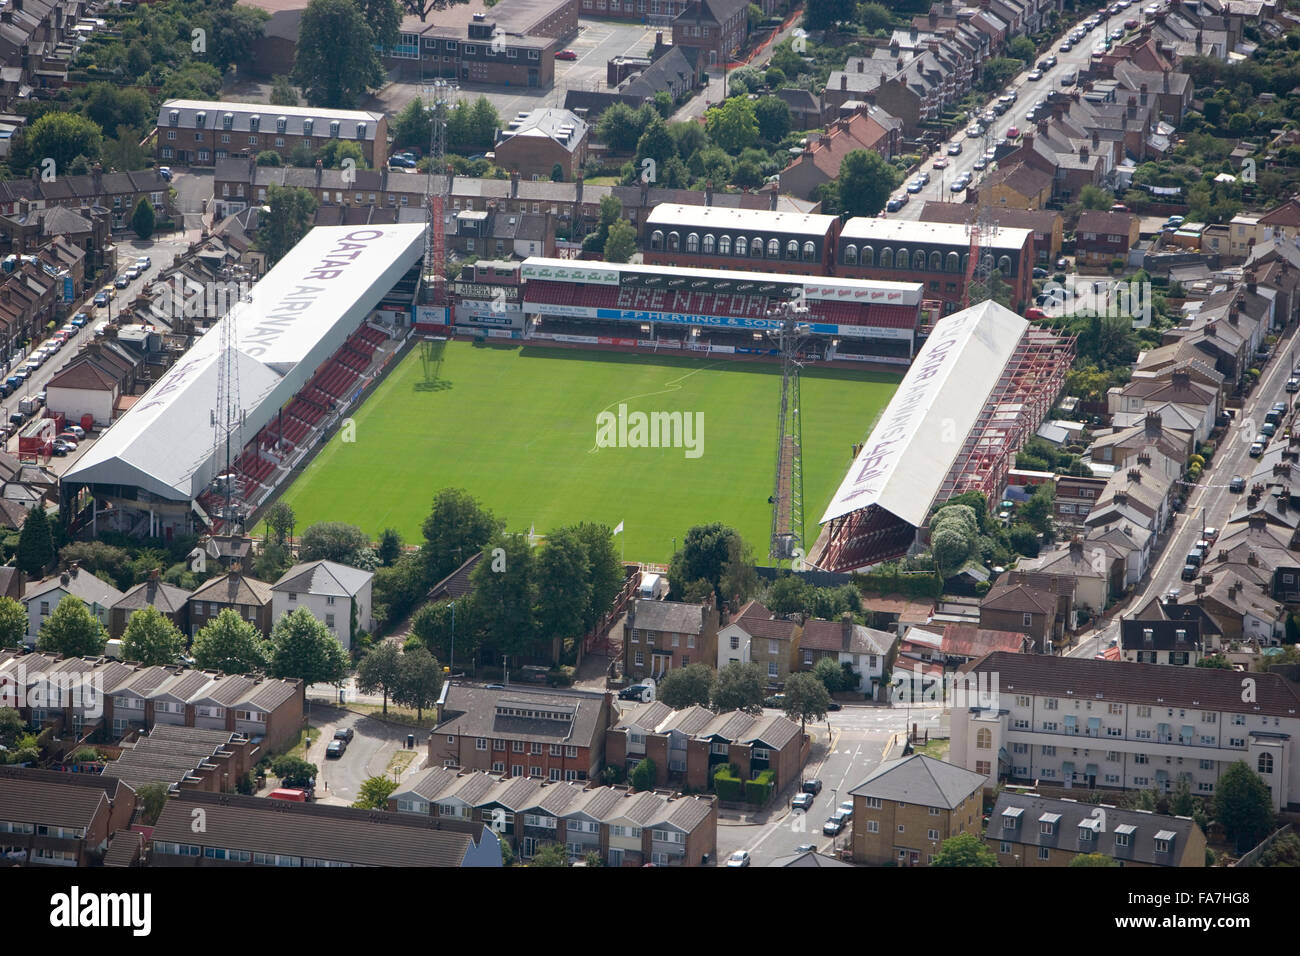 Griffin Park Stadium Brentford Aerial View Of The Home Of Brentford Football Club The Bees Since 1904 Photographed In August 06 Stock Photo Alamy